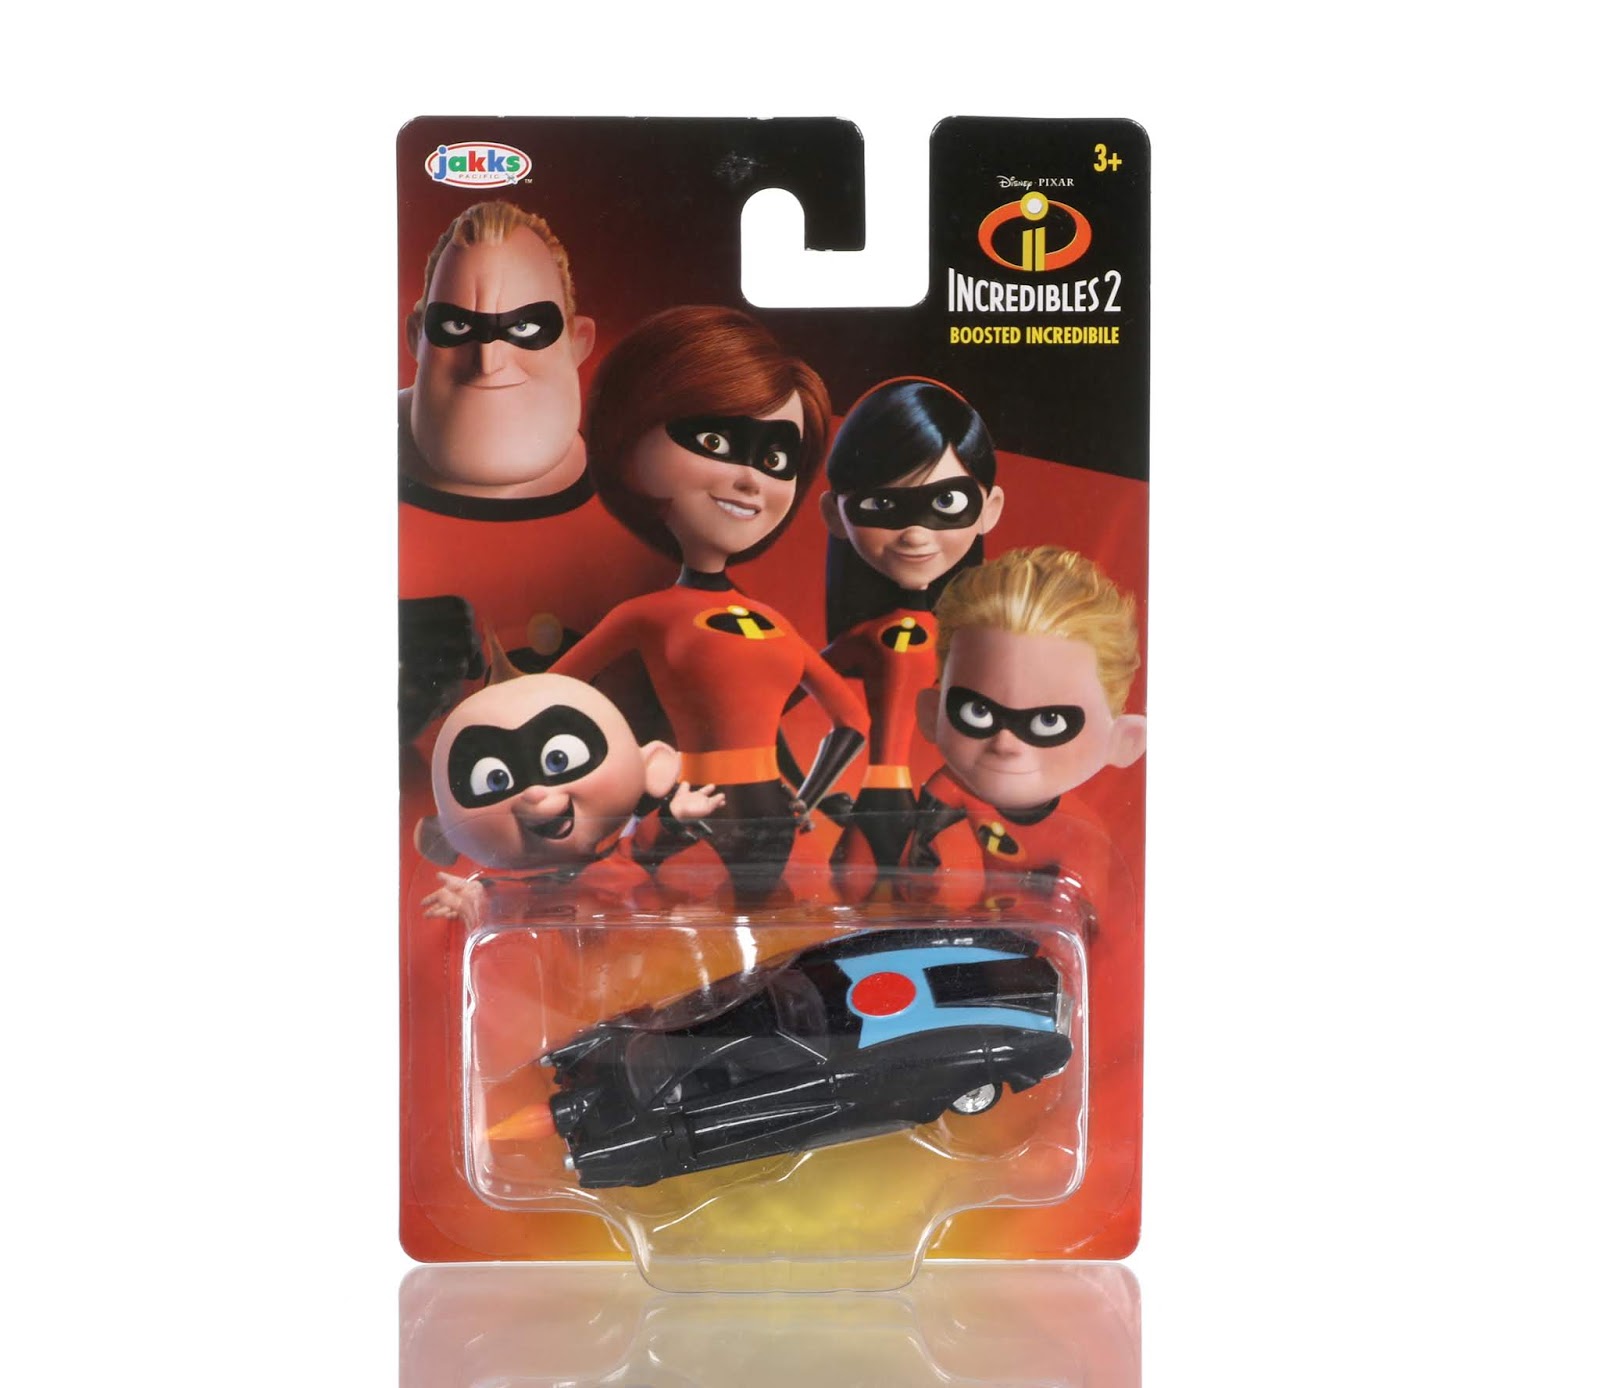 Incredibles 2 Diecast Vehicle Collection by Jakks Pacific